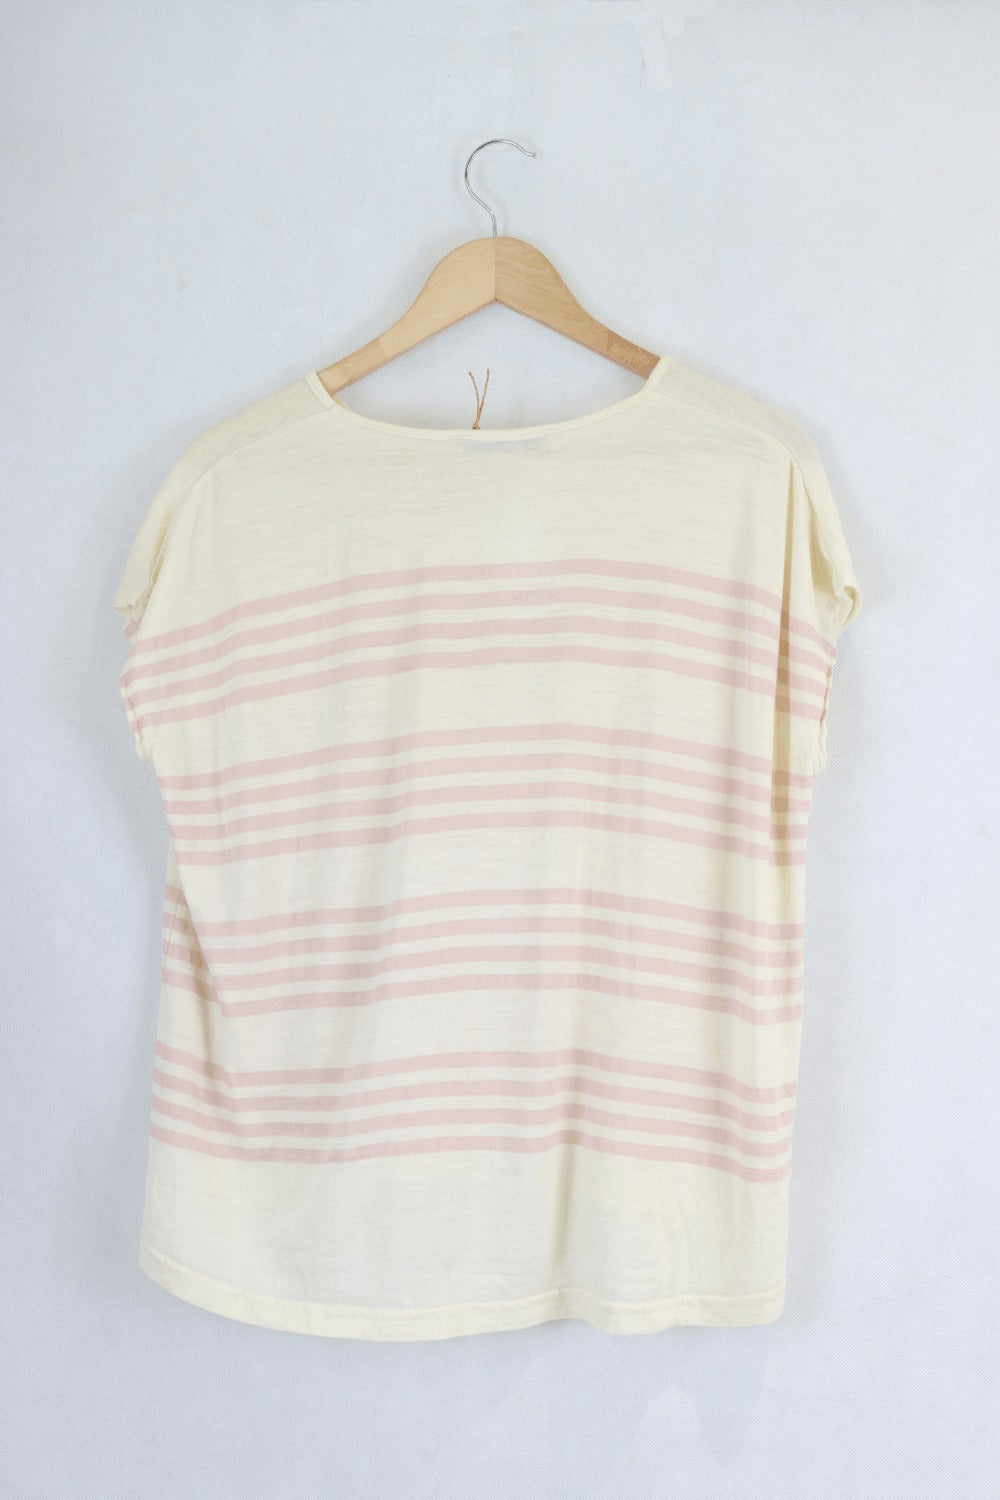 Victoria Woods Cream And Pink Striped T-Shirt 2 (10AU)